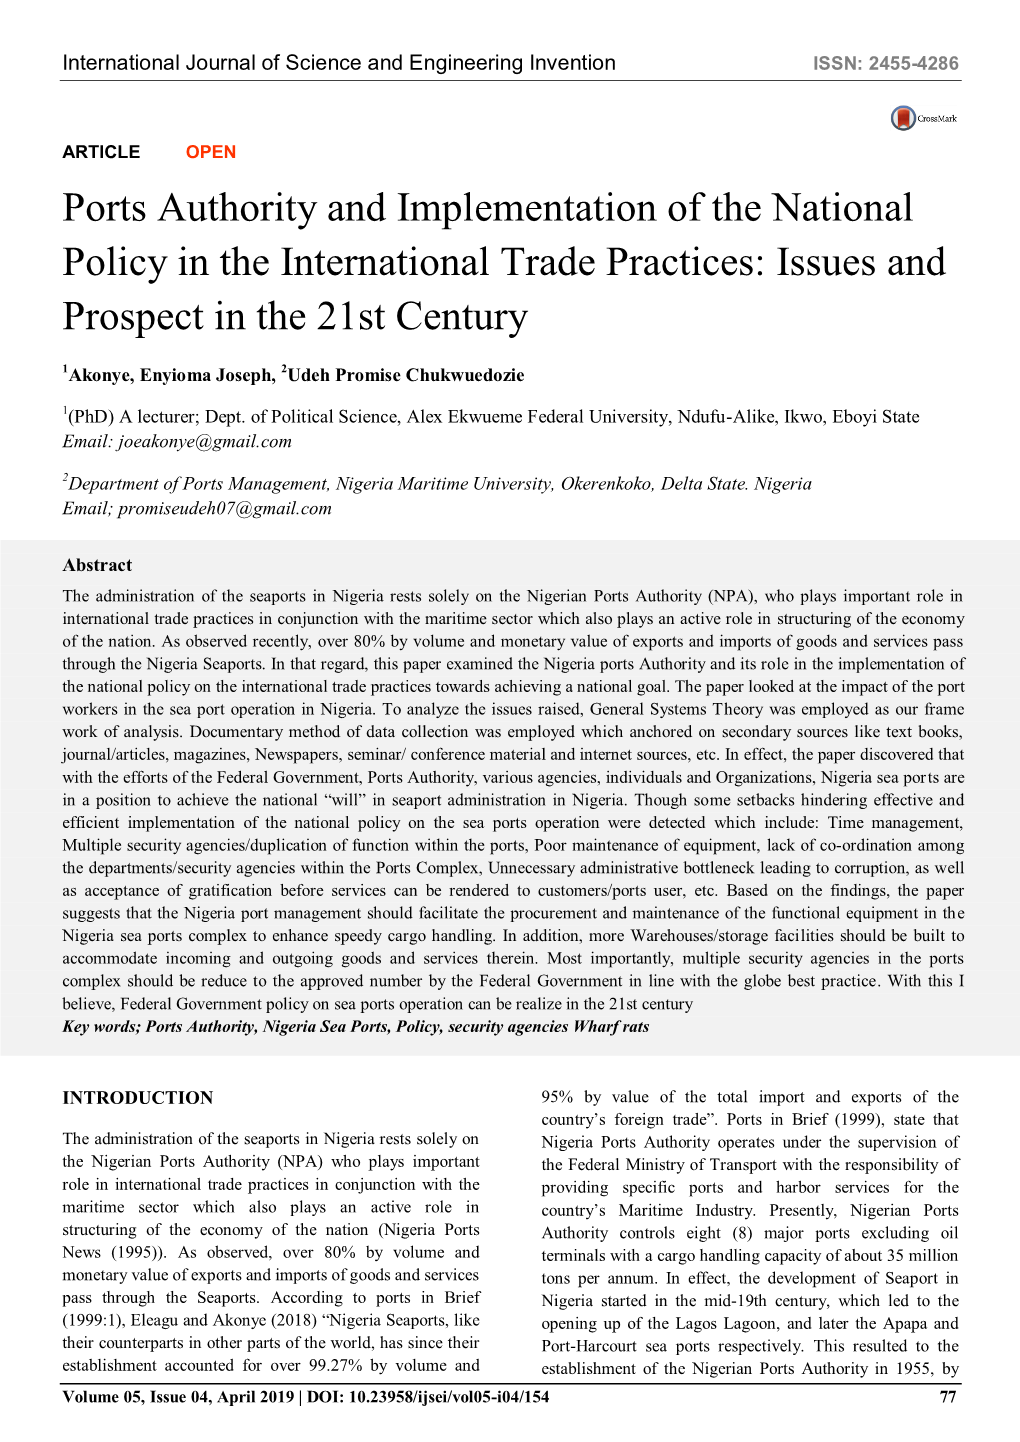 Ports Authority and Implementation of the National Policy in the International Trade Practices: Issues and Prospect in the 21St Century